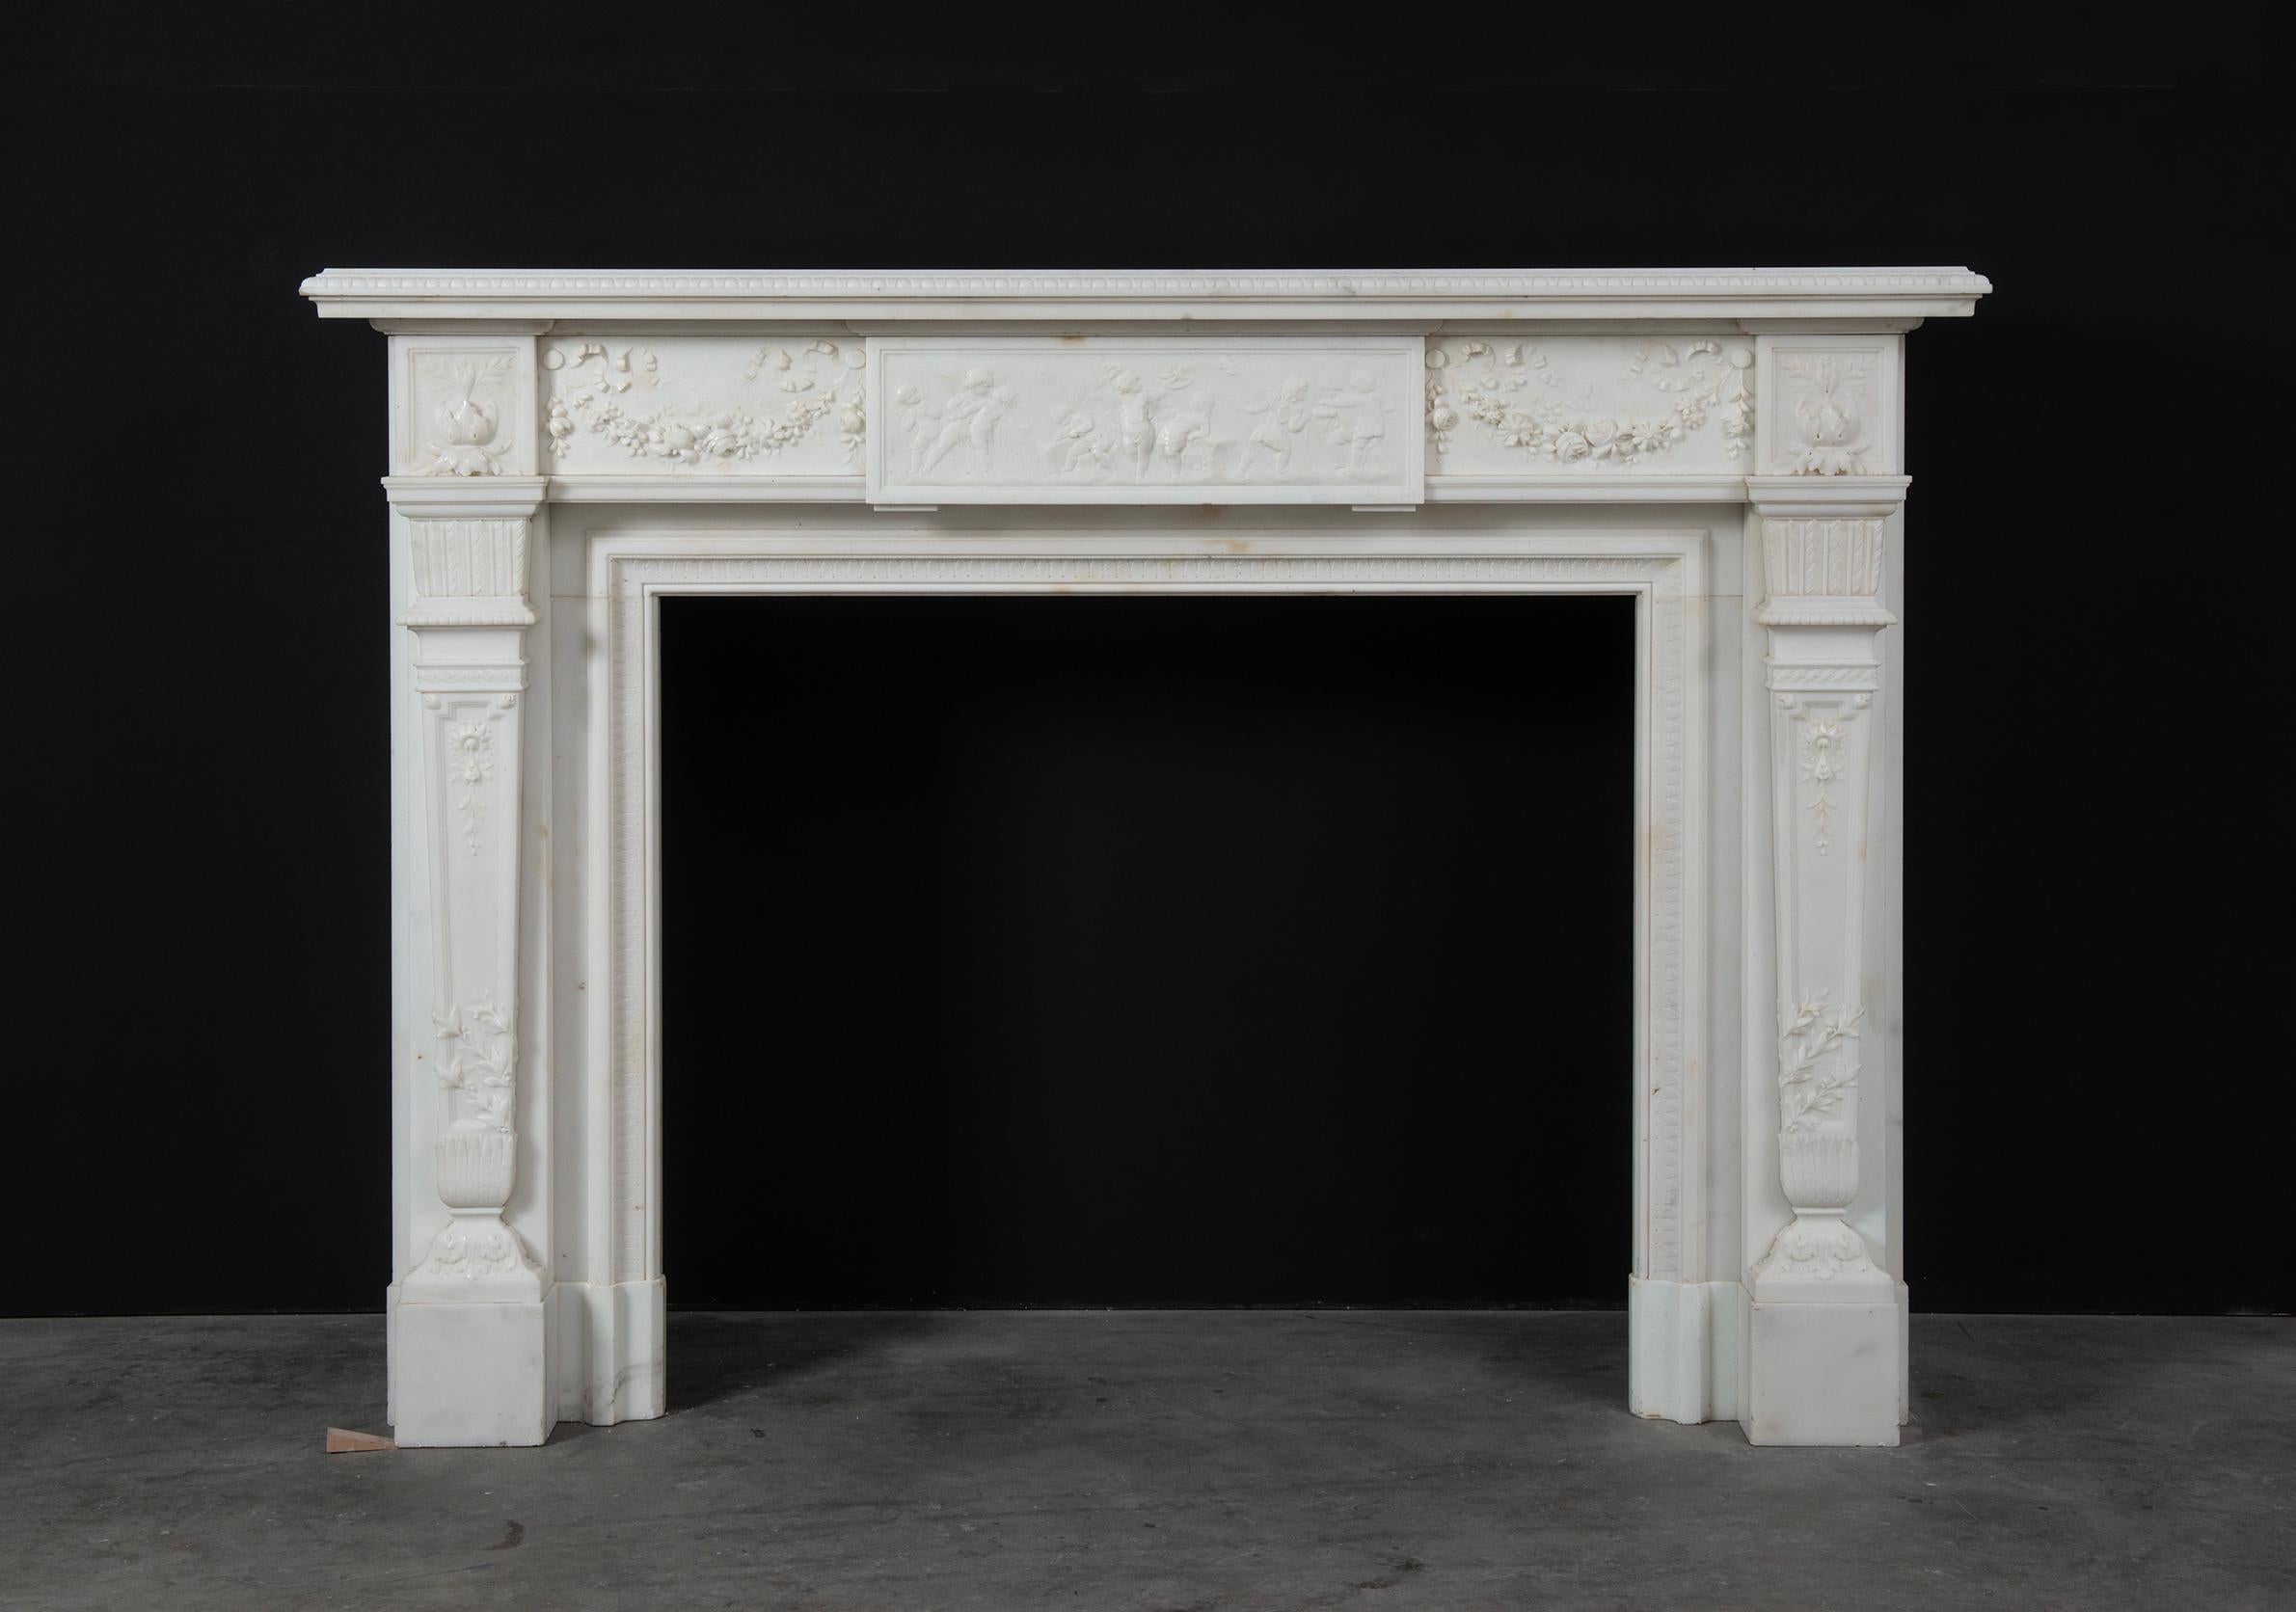 Neoclassical Statuary Marble Mantelpiece

A beautiful, detailed and finely carved statuary white marble fireplace mantel in Neoclassical style.

The superb molded shelf with perfect egg and dart edge decor sits over a finely carved frieze which is